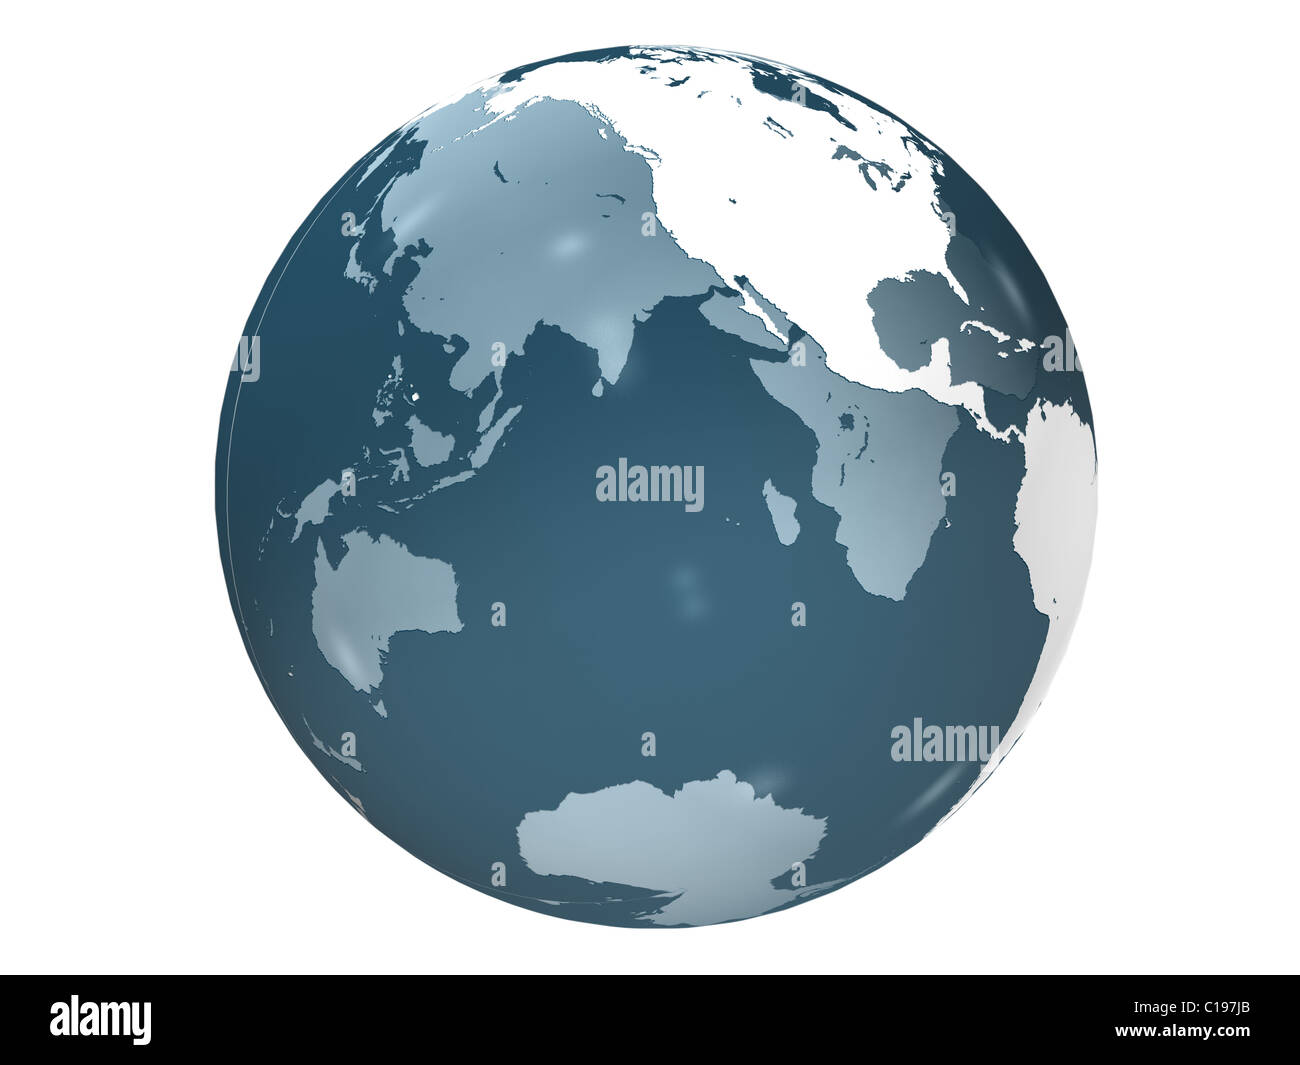 3d Rendering Of Earth Globe Of Glass Material Stock Photo Alamy